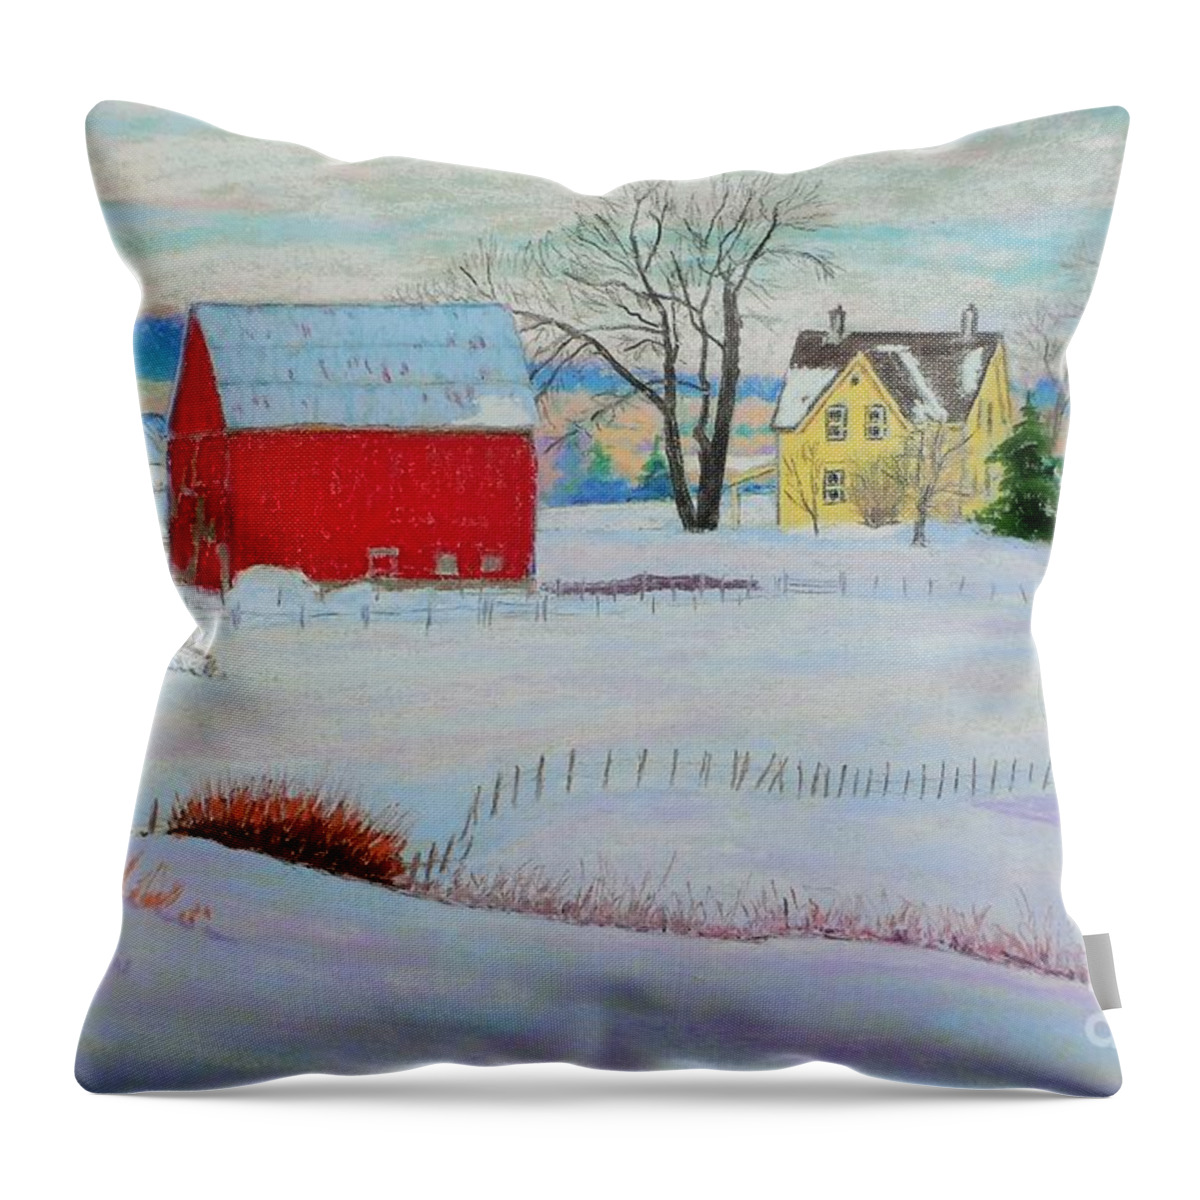  Pastel Throw Pillow featuring the pastel Windsor Forks by Rae Smith